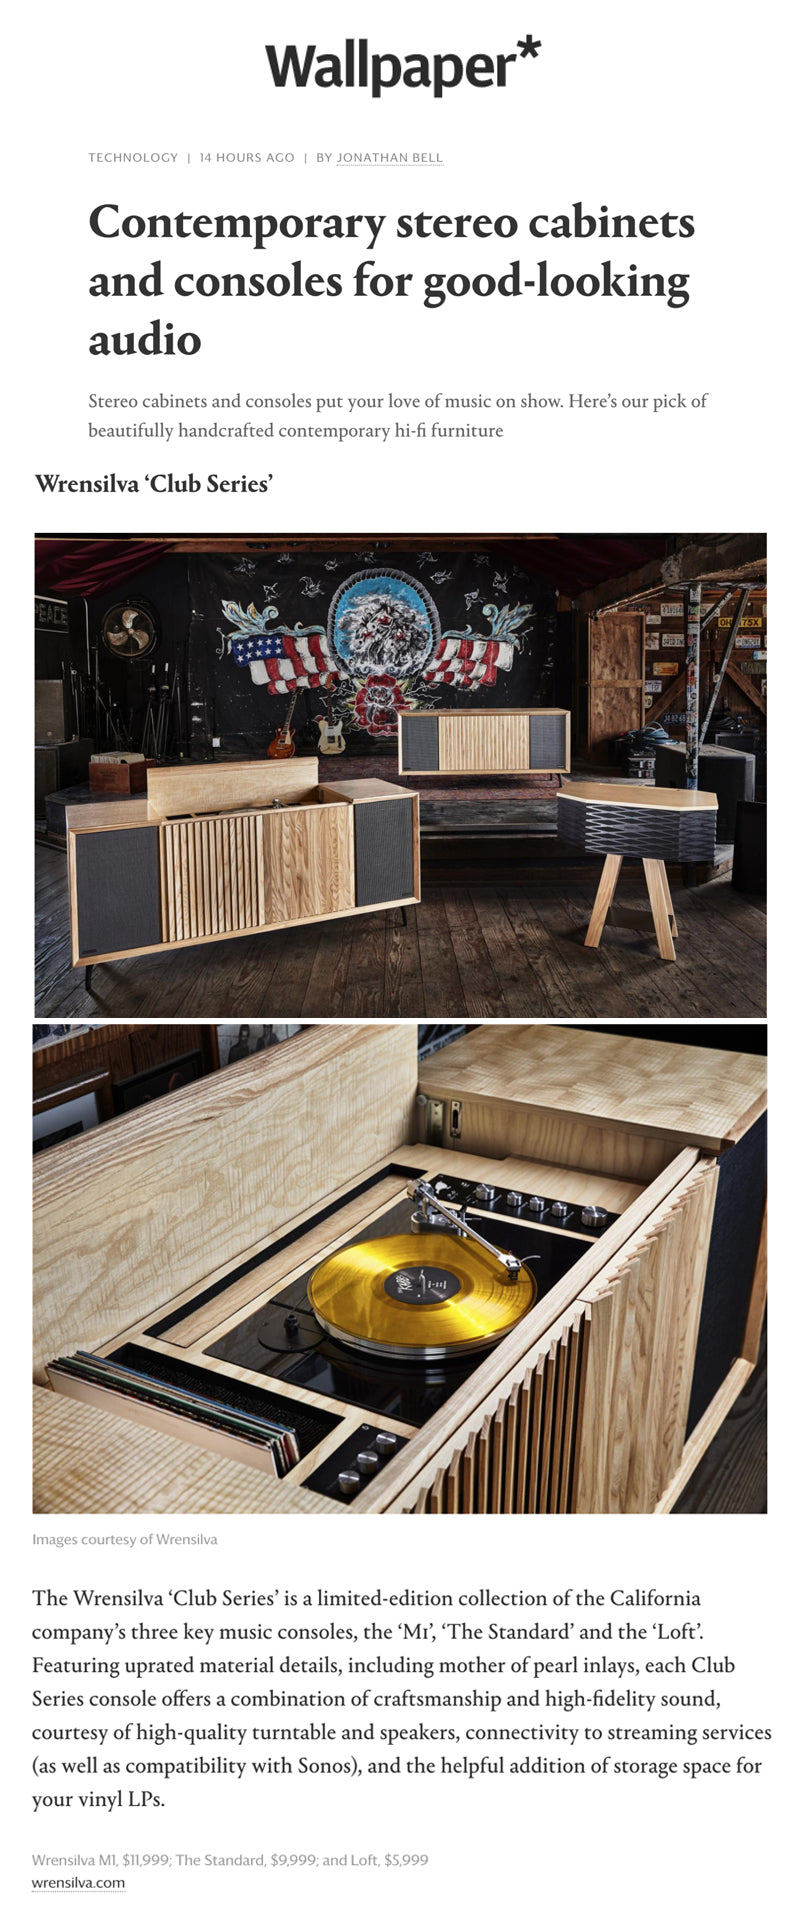 Wallpaper - Contemporary stereo cabinets and consoles for good-looking audio